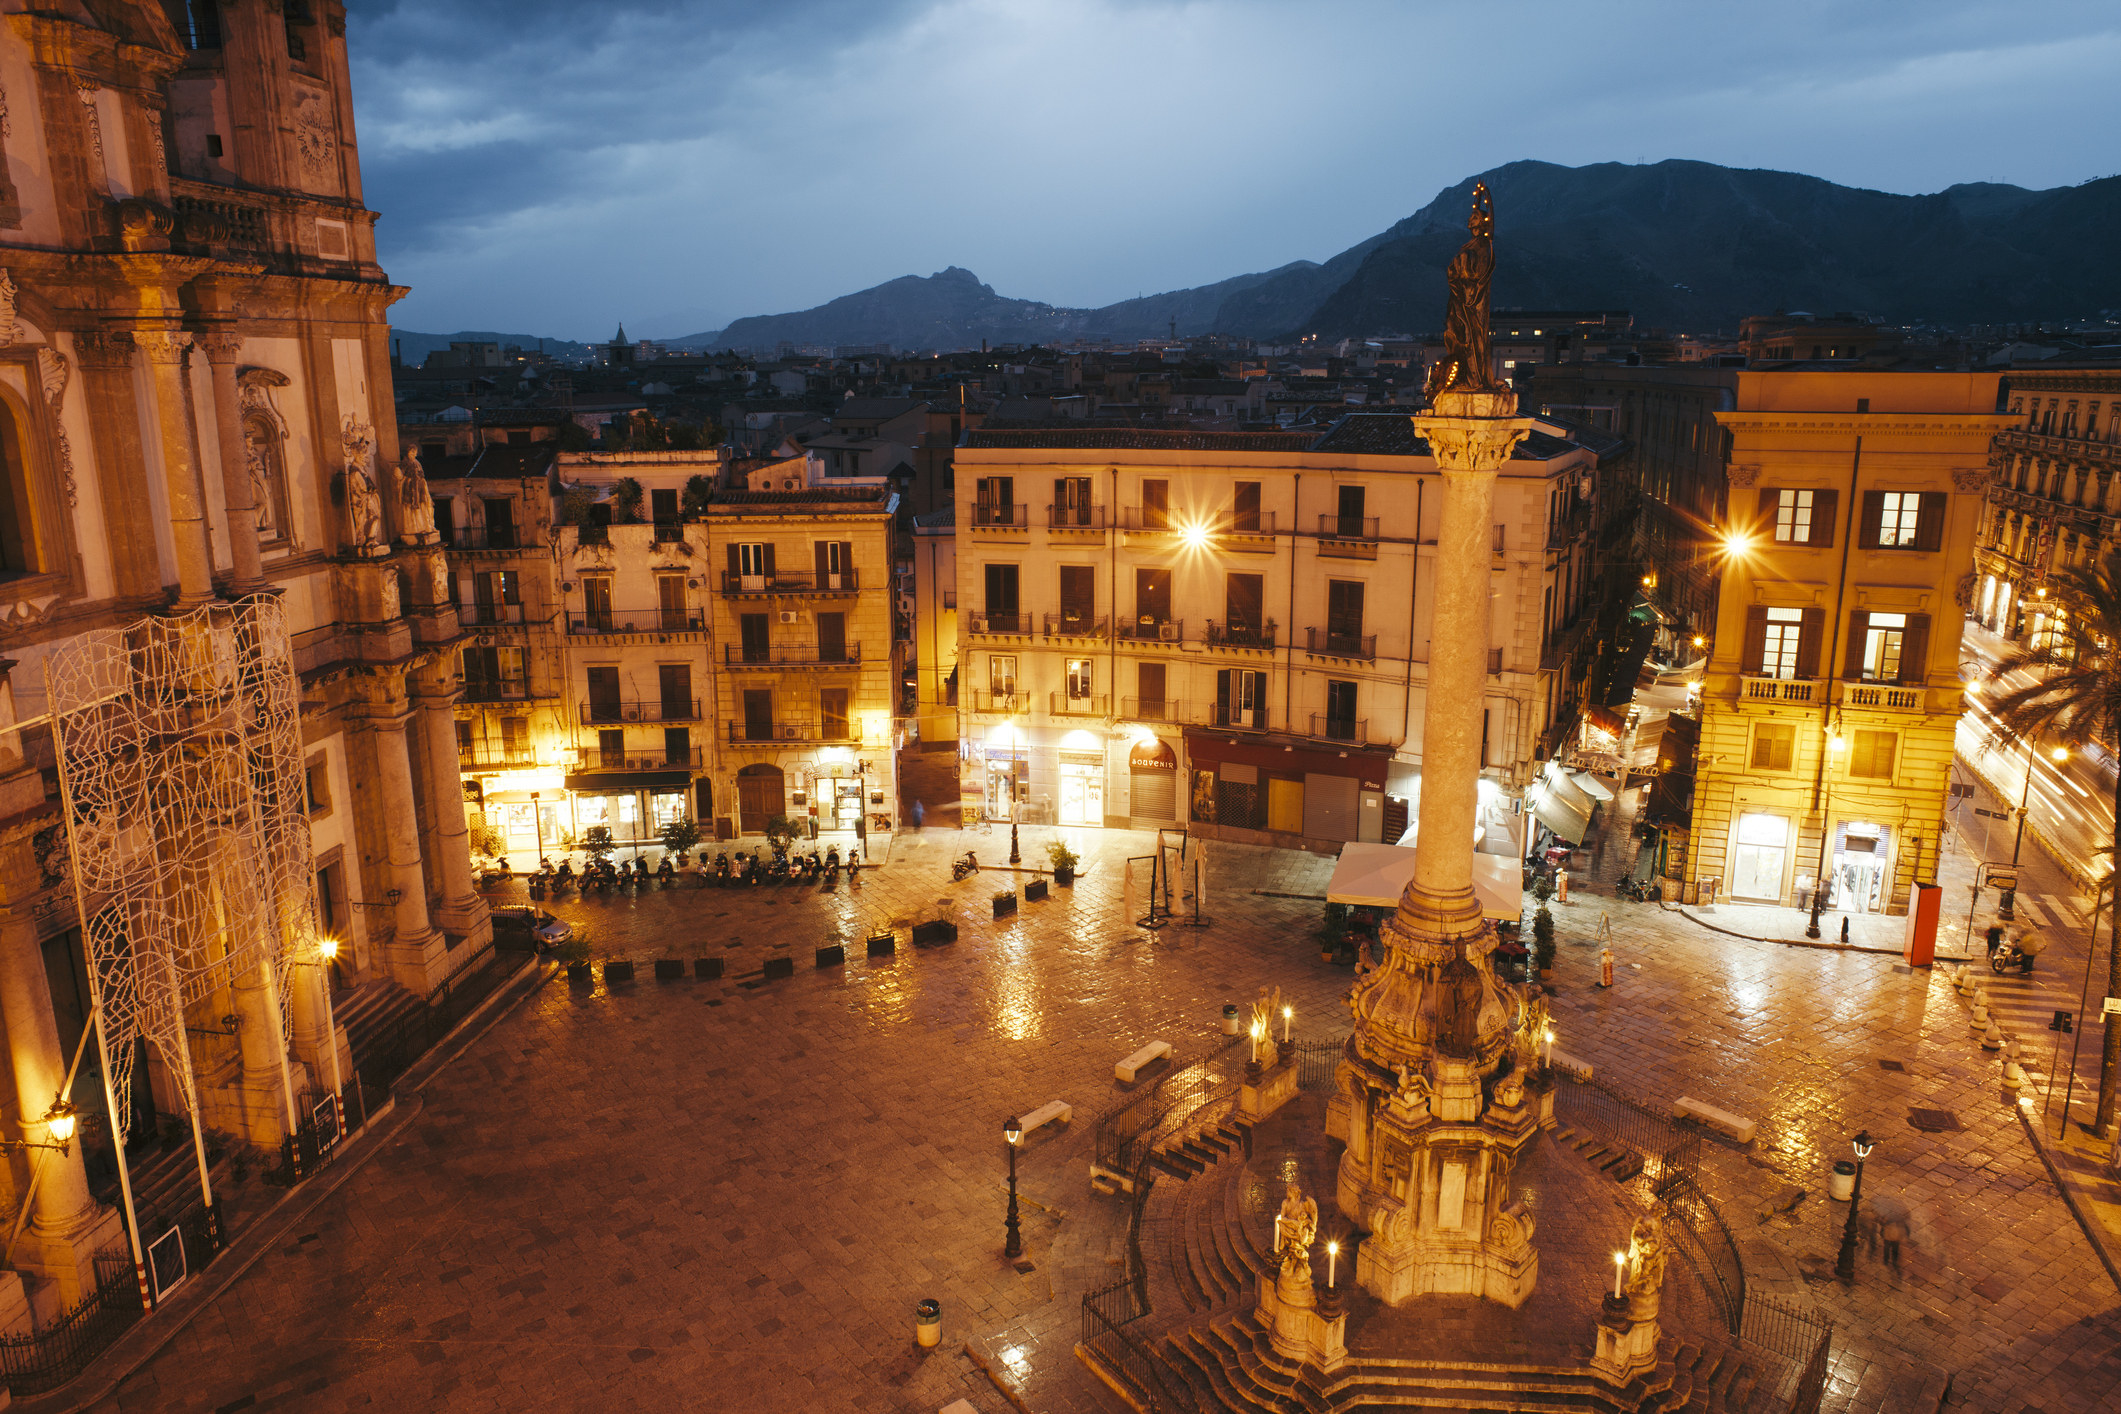 Elevated view over Piazza in Palermo at night.